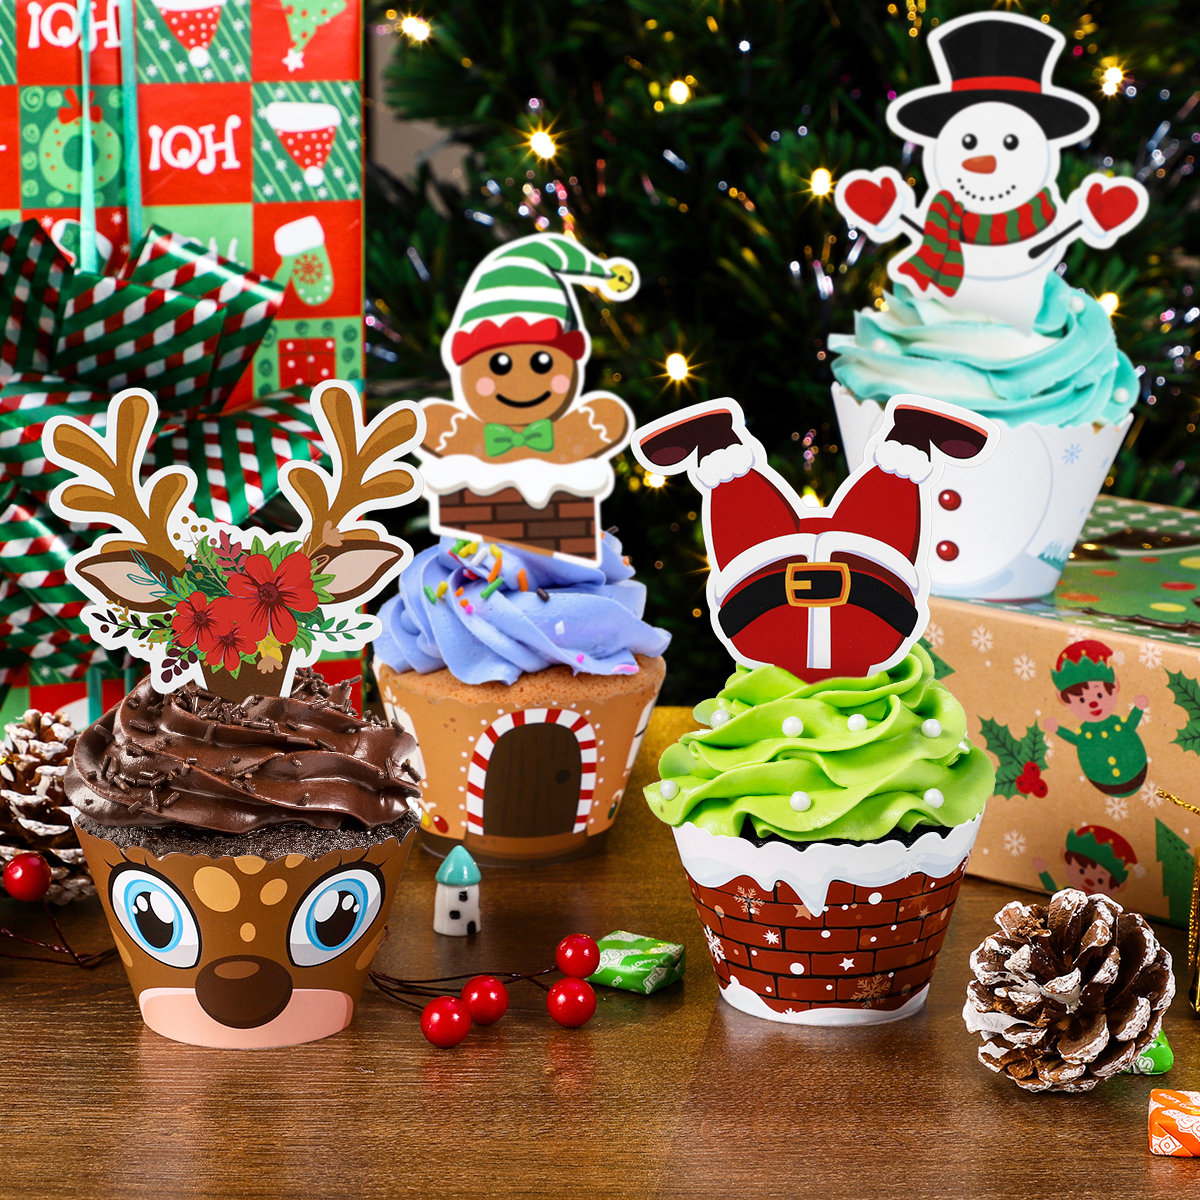 pixnor 36 Sets Christmas Cupcake Toppers And Wrappers Cupcake Cake Decorating Picks Home Party Decor Christmas Party Supplies Favors